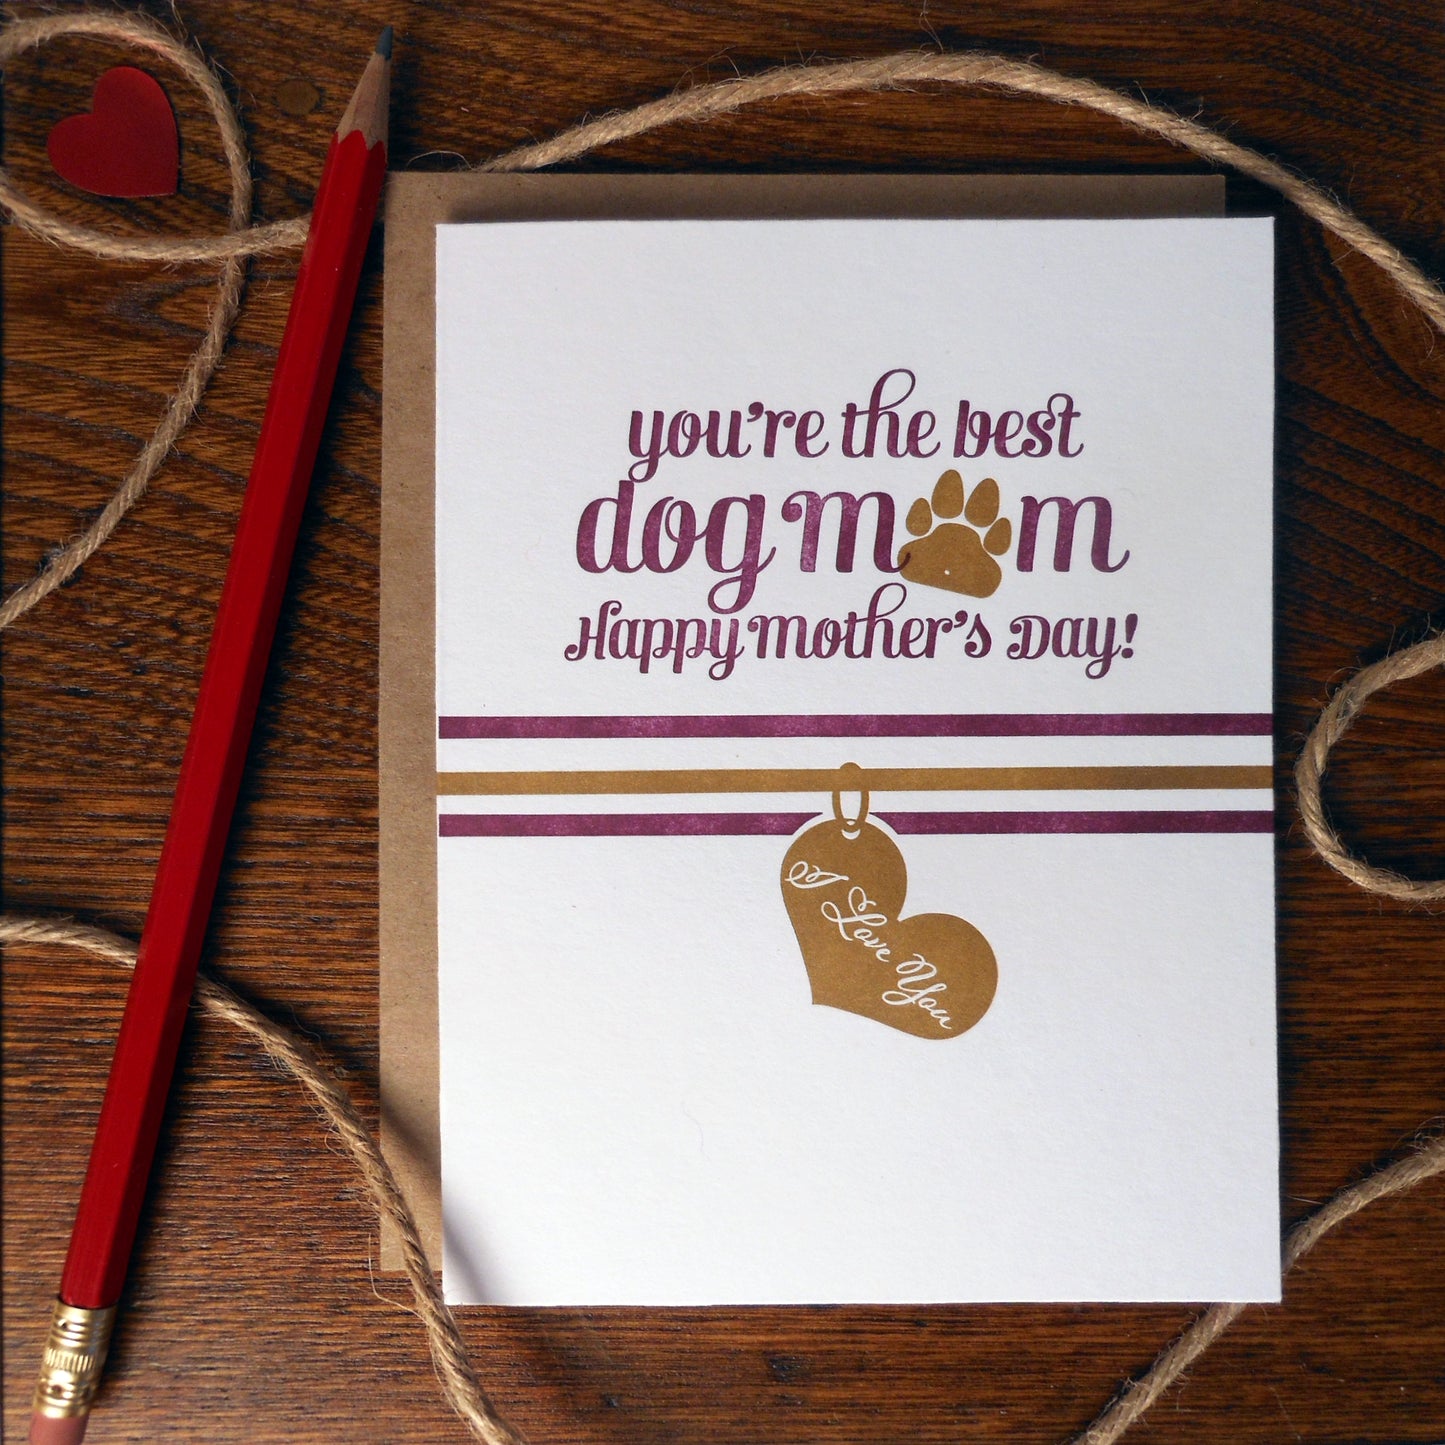 Dog Mother's Day Card